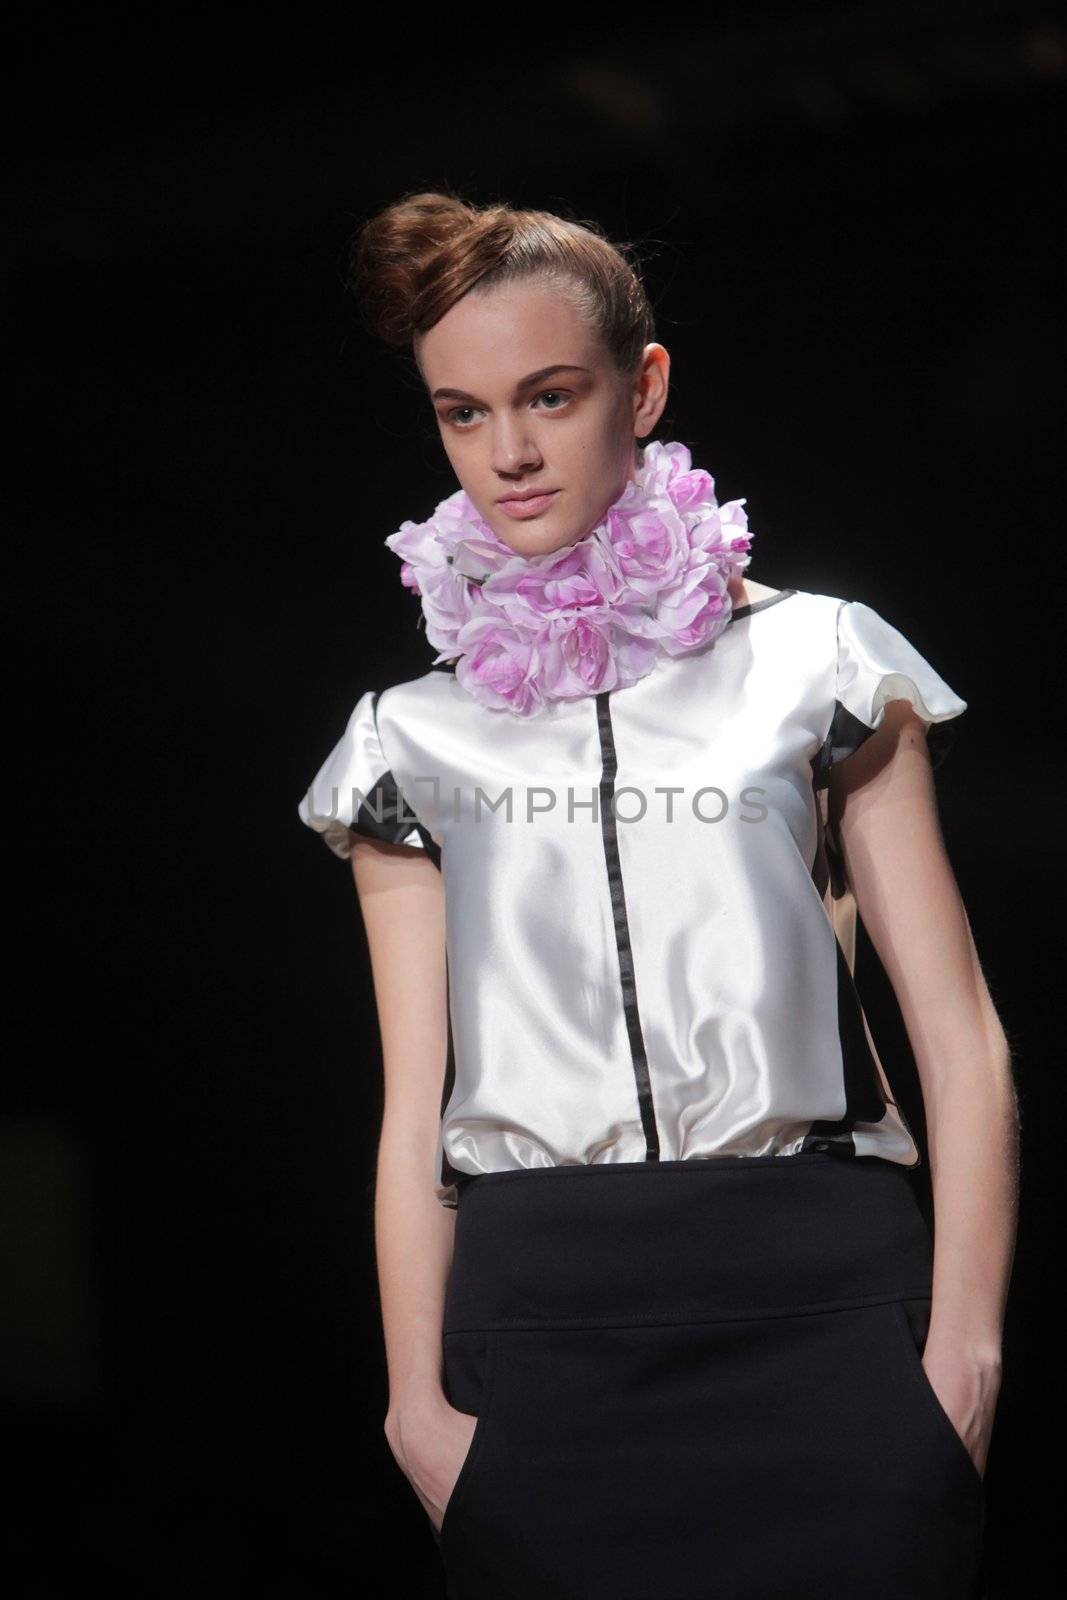 ZAGREB, CROATIA - MARCH 22: Fashion model wears clothes made by Image Haddad on "CRO A PORTER" show on March 22, 2012 in Zagreb, Croatia.